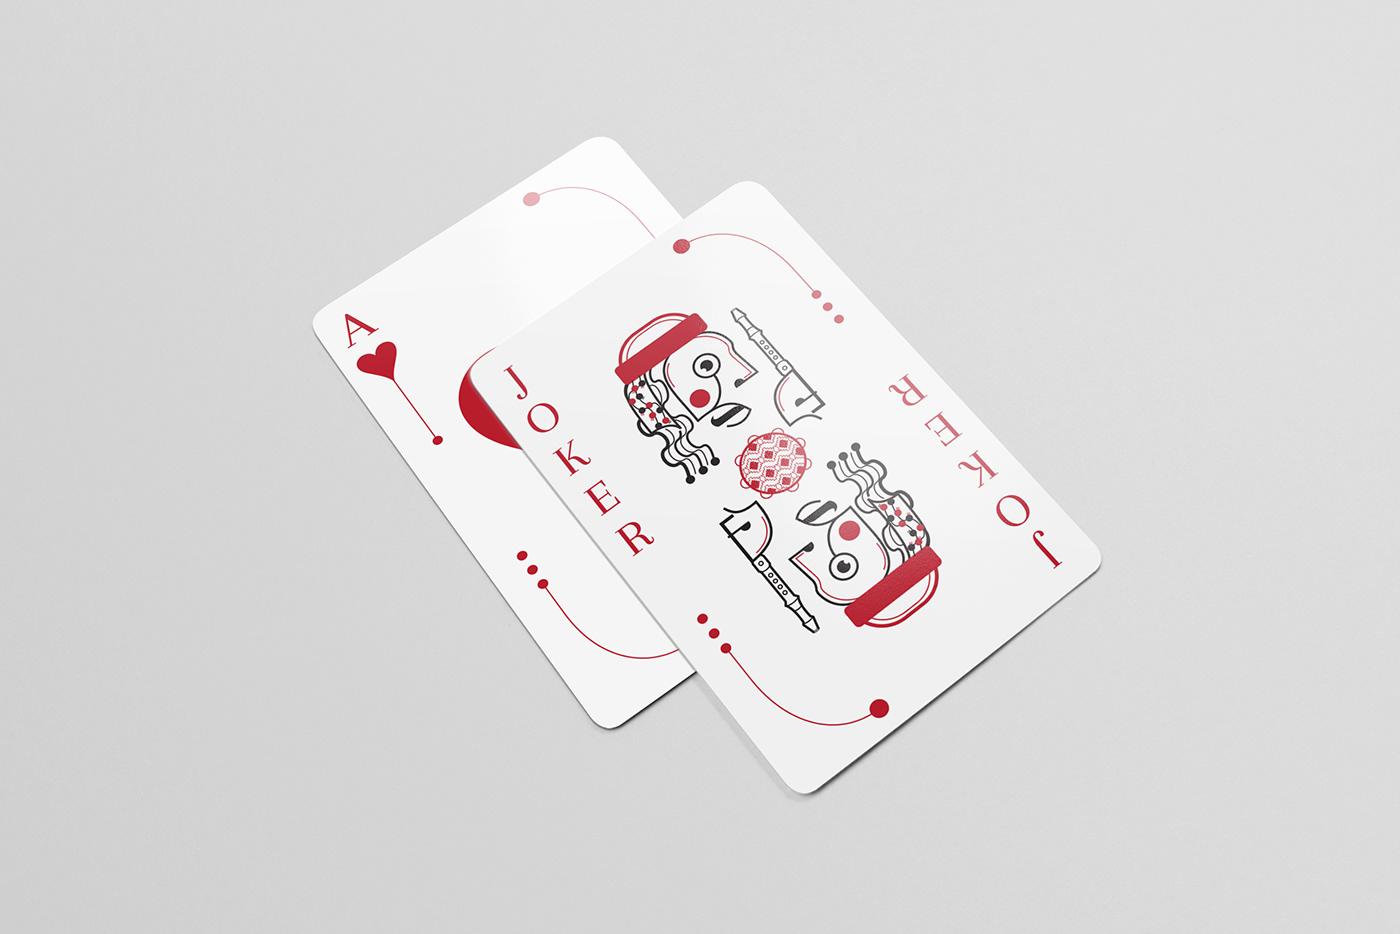 ace cards diamonds heart jack king Lebanese playing queen spades